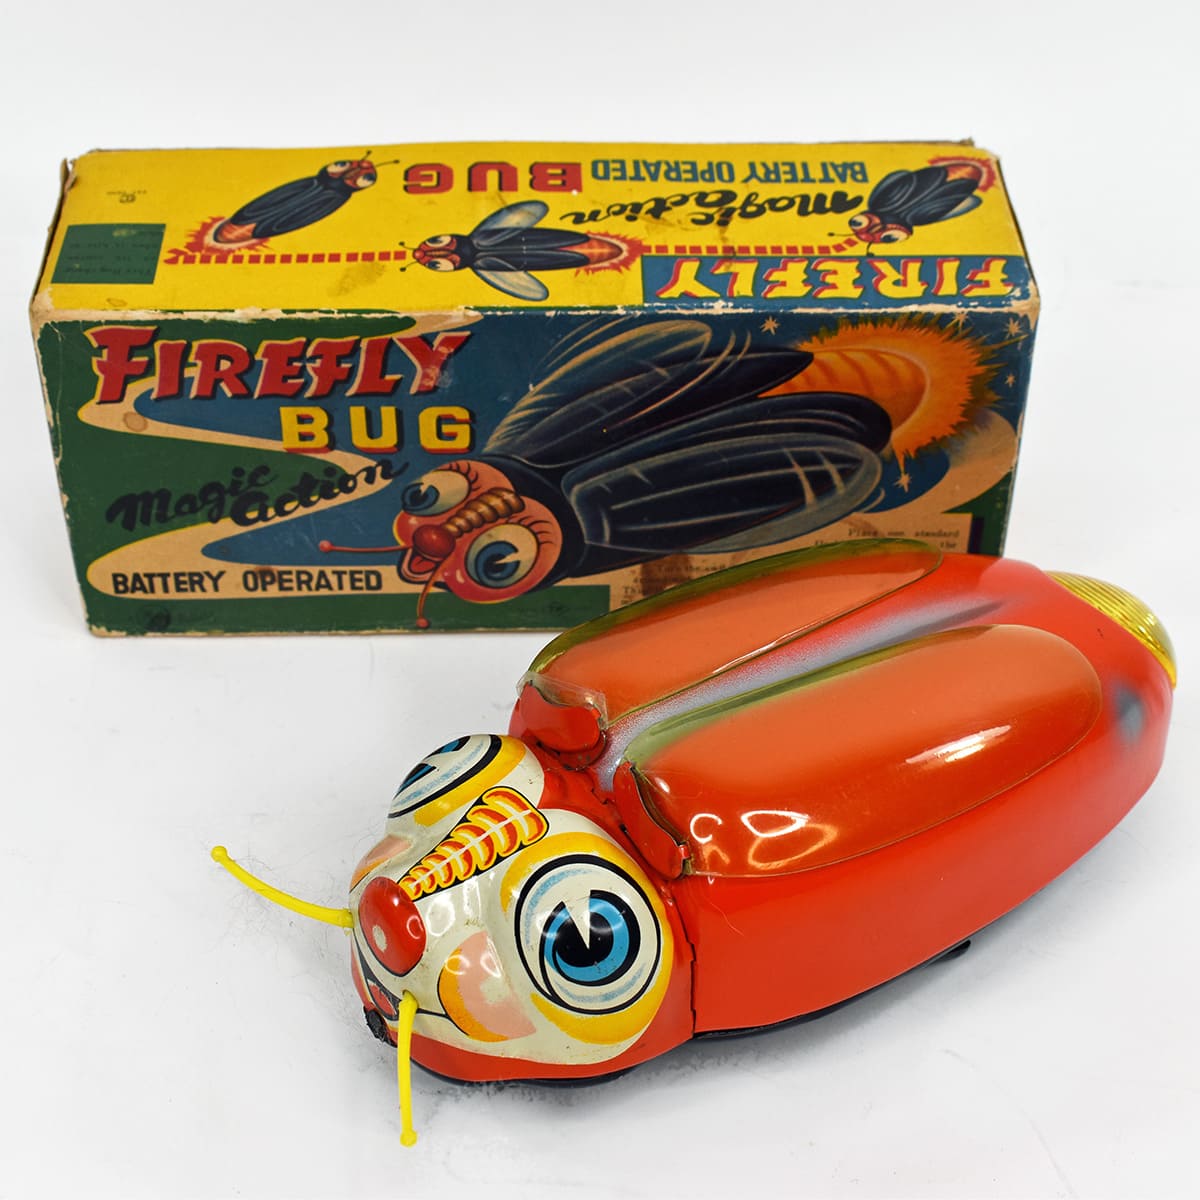 FIREFLY BUG with MAGIC ACTION Box Battery operated toy